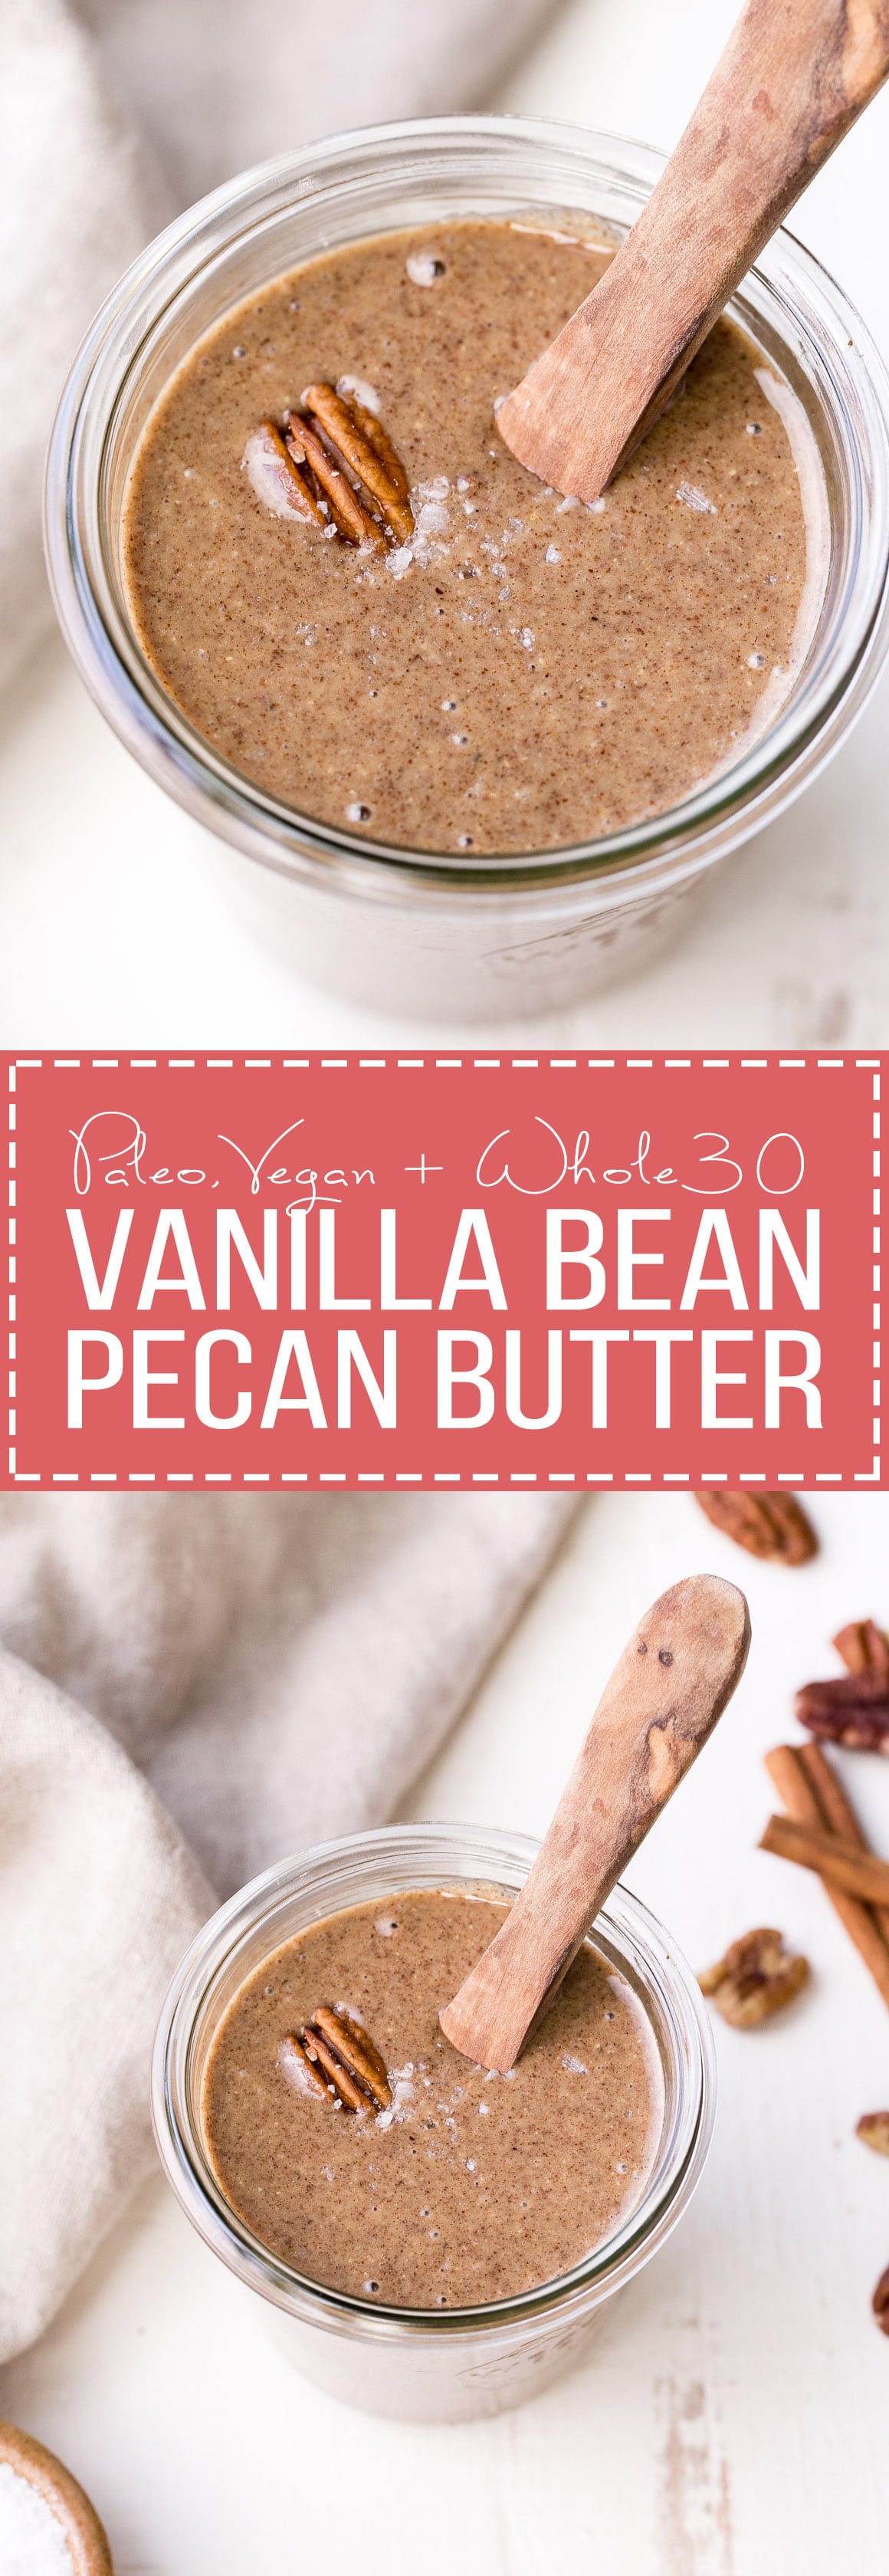 This Vanilla Bean Pecan Butter is incredibly smooth and easy to make. The buttery pecans blend up quickly into a creamy nut butter that you'll want to spread on everything! Cinnamon and vanilla beans complement the pecans wonderfully in this Paleo, vegan, and Whole30-approved snack.